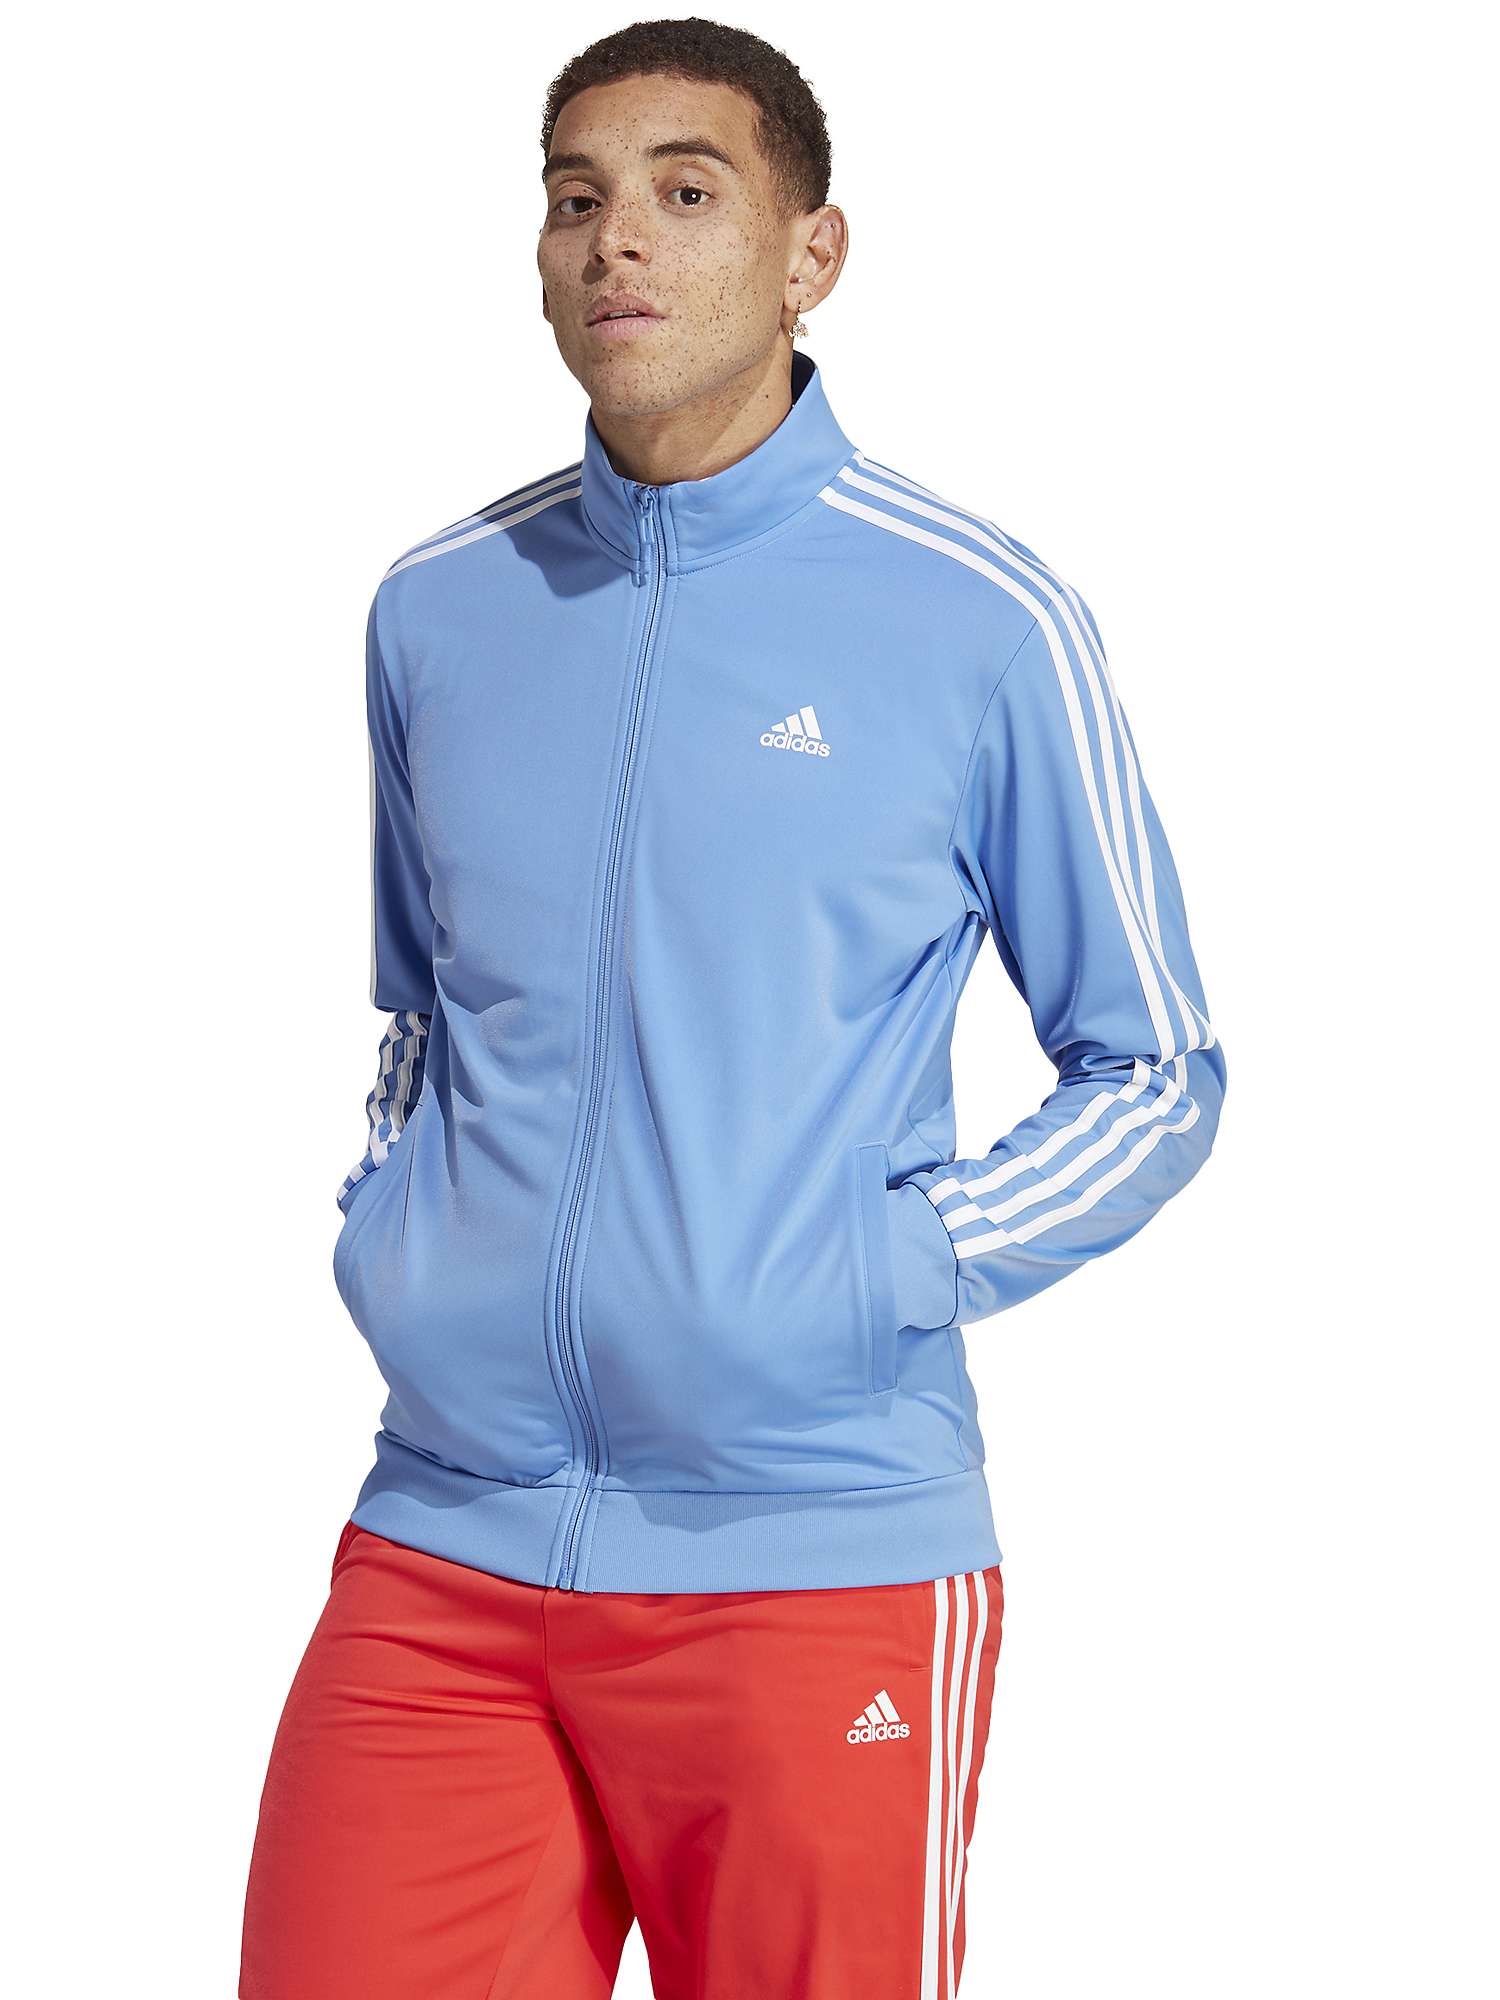 adidas Essentials Warm-Up 3-Stripes Track Top at John Lewis & Partners